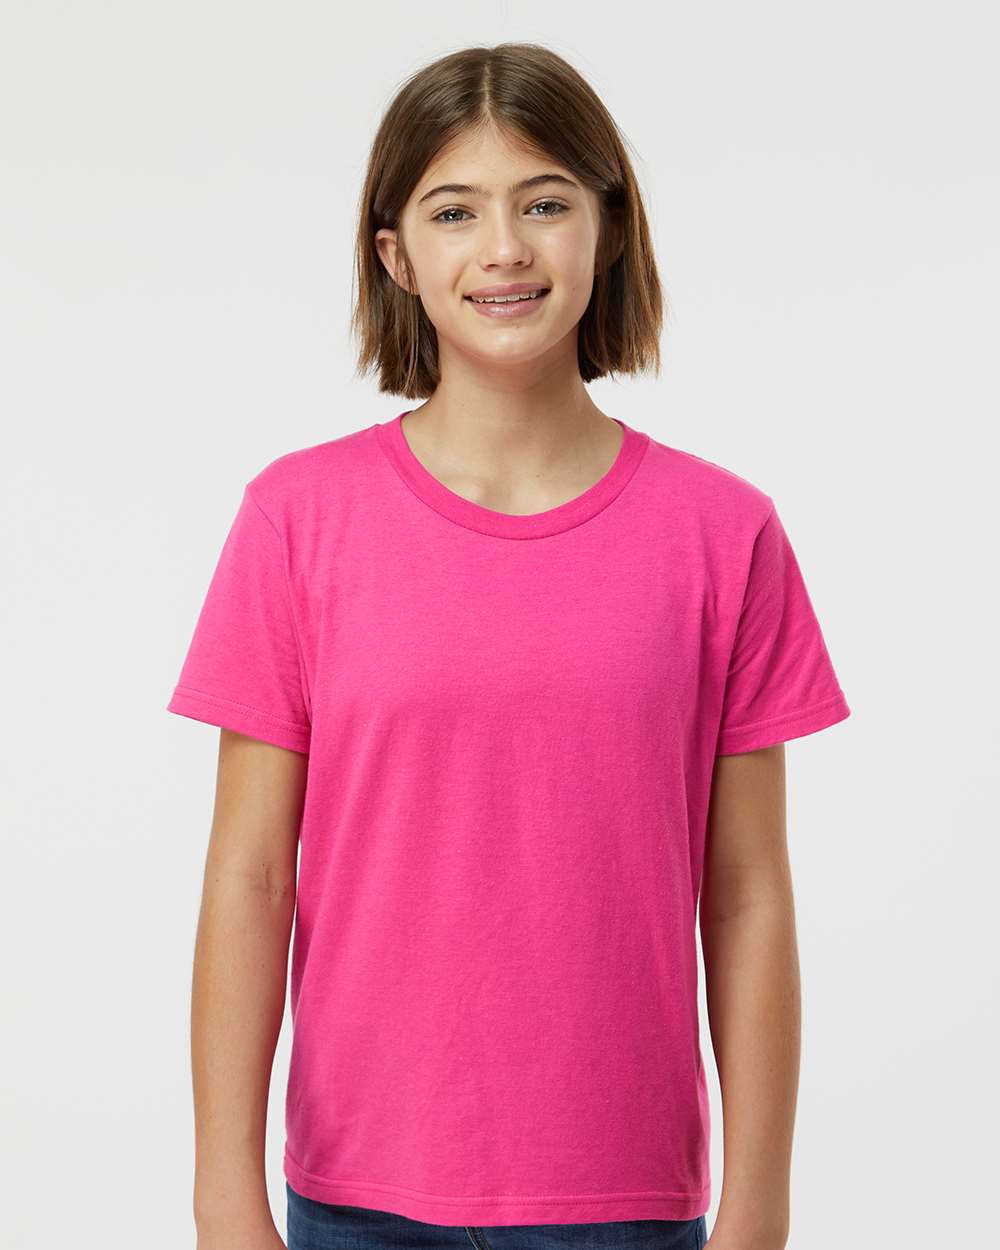 Pretreated Tultex 235 Youth Fine Jersey T-Shirt